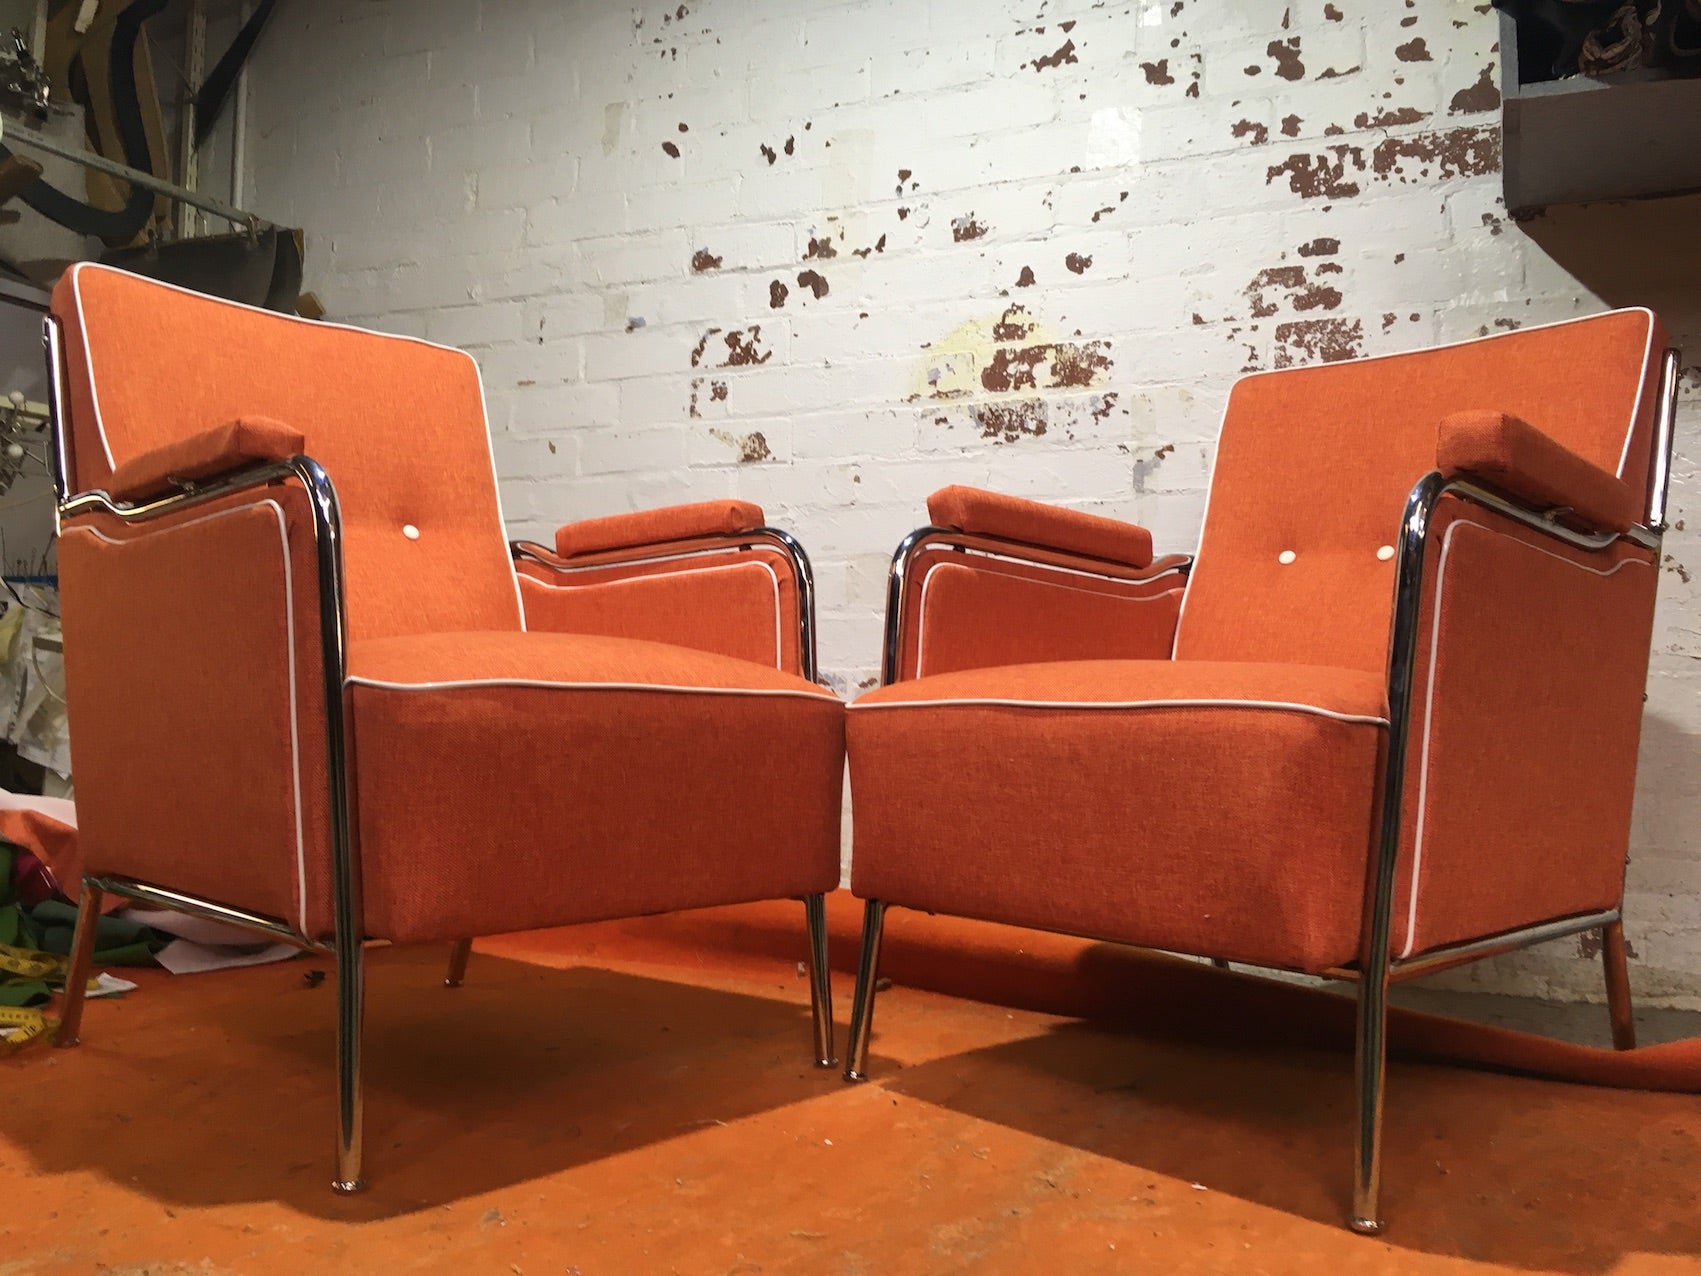 Vintage industrial 1935 Design chairs by Mucke Melder  sold as set #2221